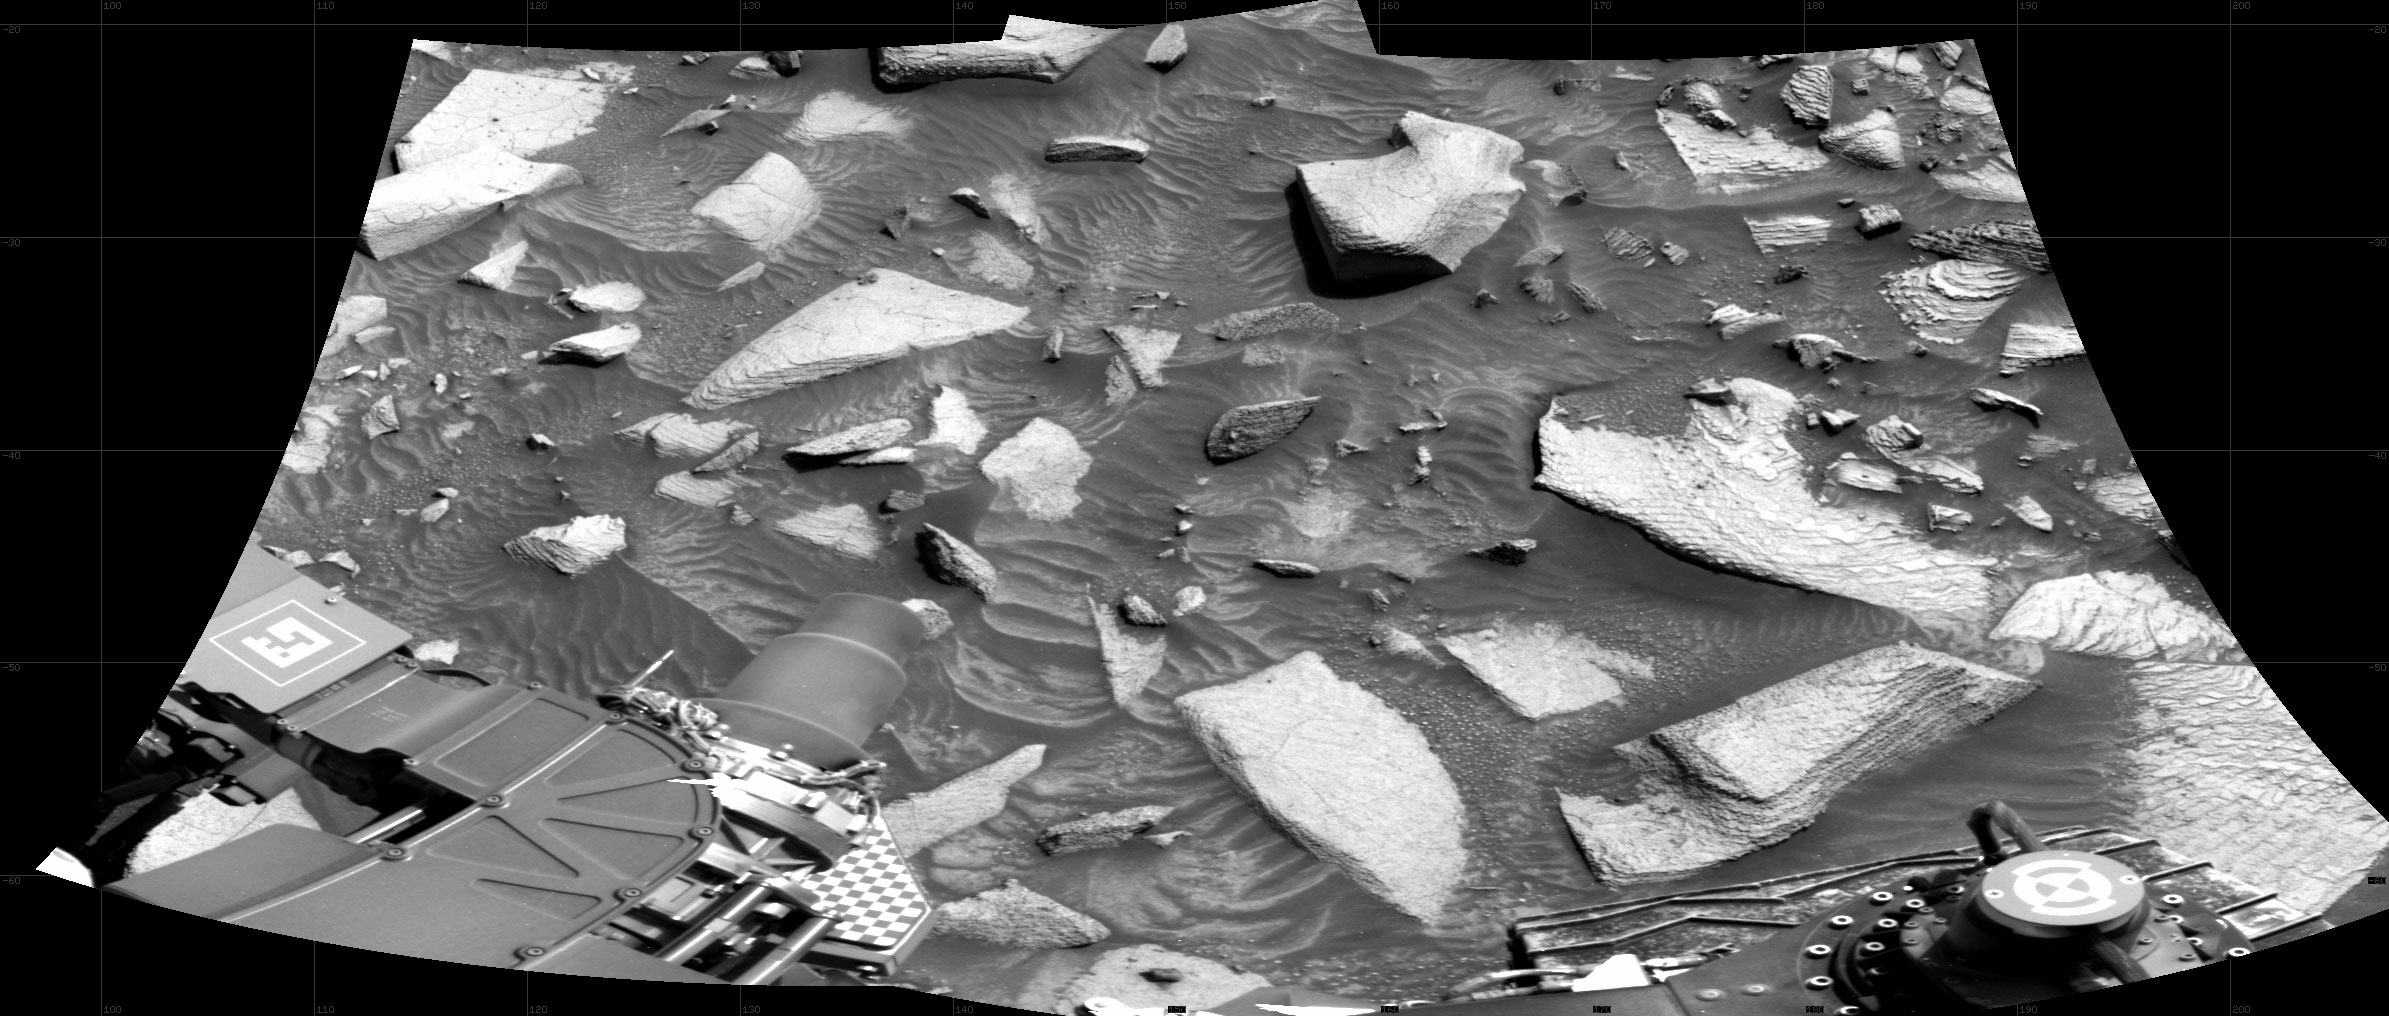 Curiosity took the images on April 14, 2024, Sol 4155 of the Mars Science Laboratory mission at drive 2386, site number 106. The local mean solar time for the image exposures was 1 PM.